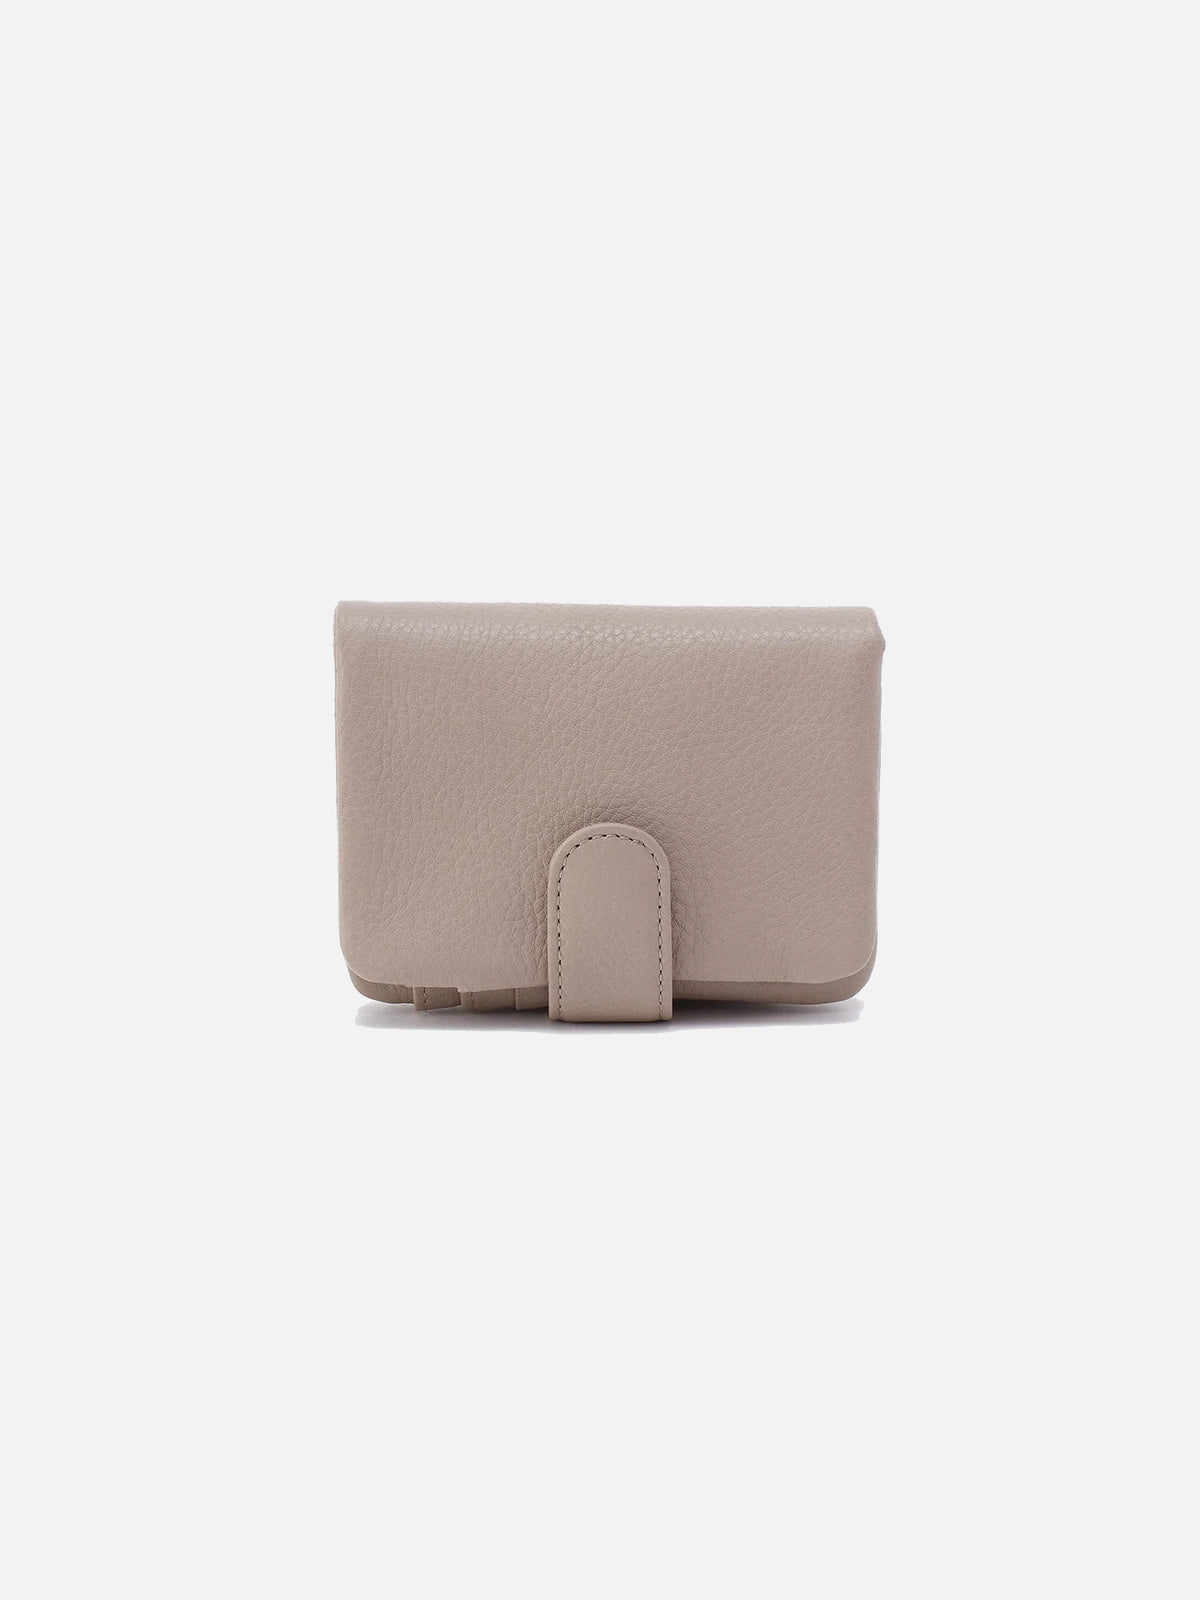 hobo fern bifold wallet in taupe pebbled leather